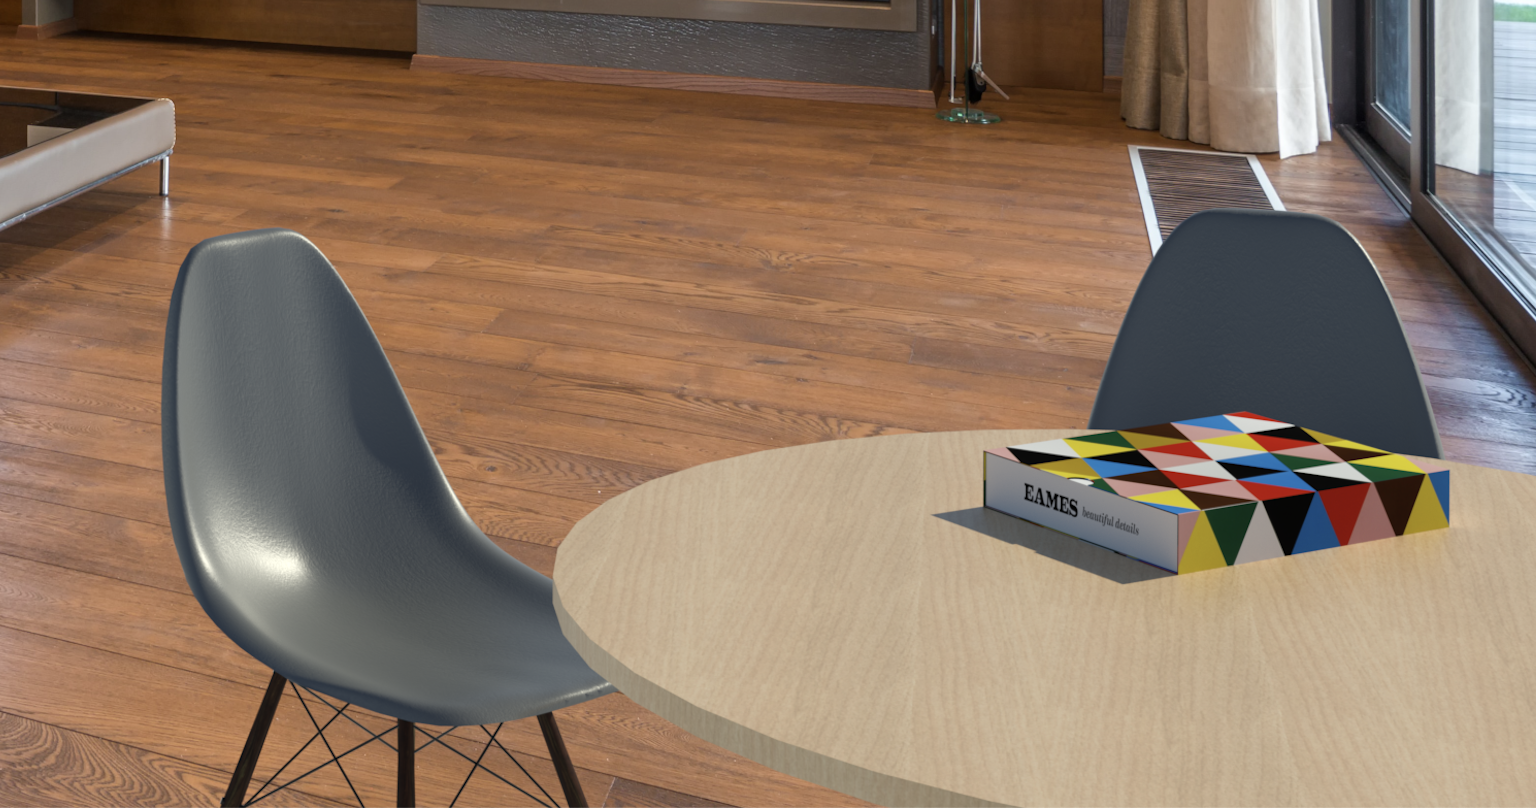 Rendering of the Eames Shell Chair Revit family in a home setting.